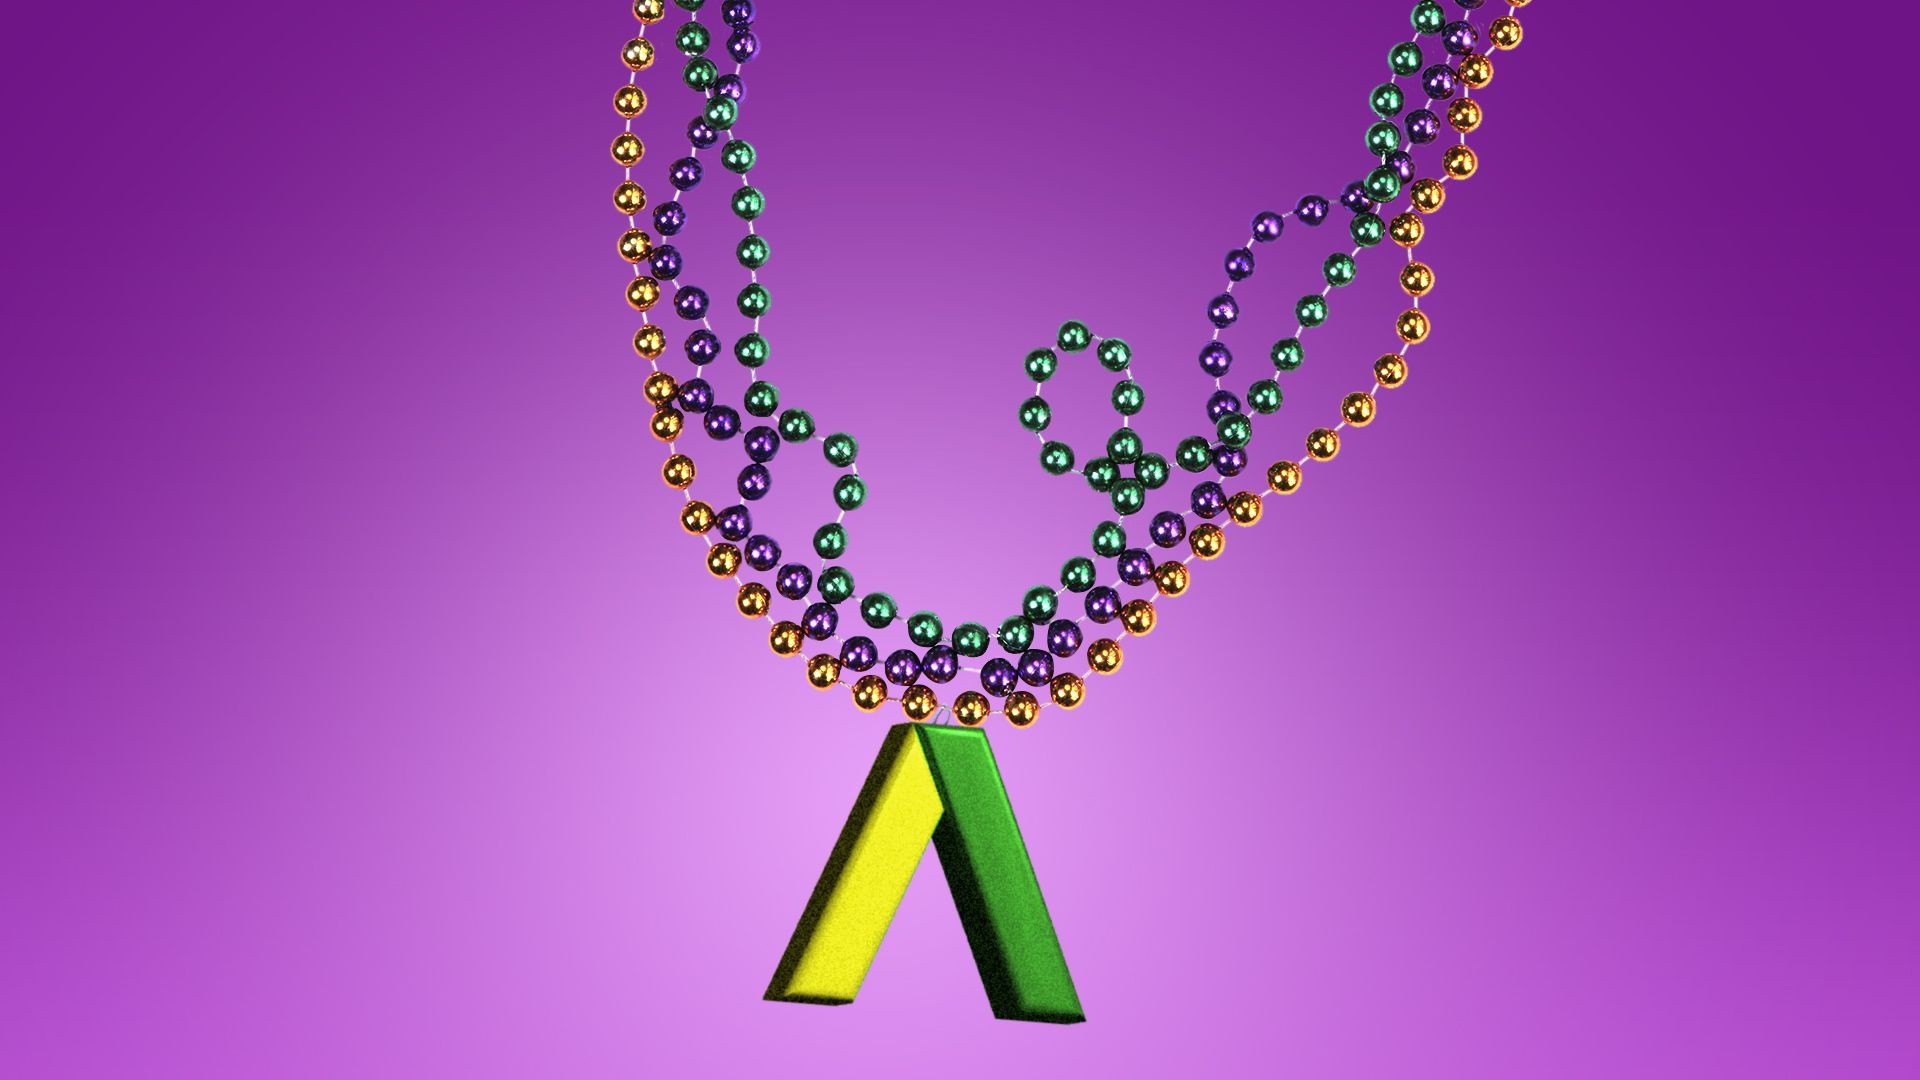 Illustration of Mardi Gras beads with an Axios logo pendant